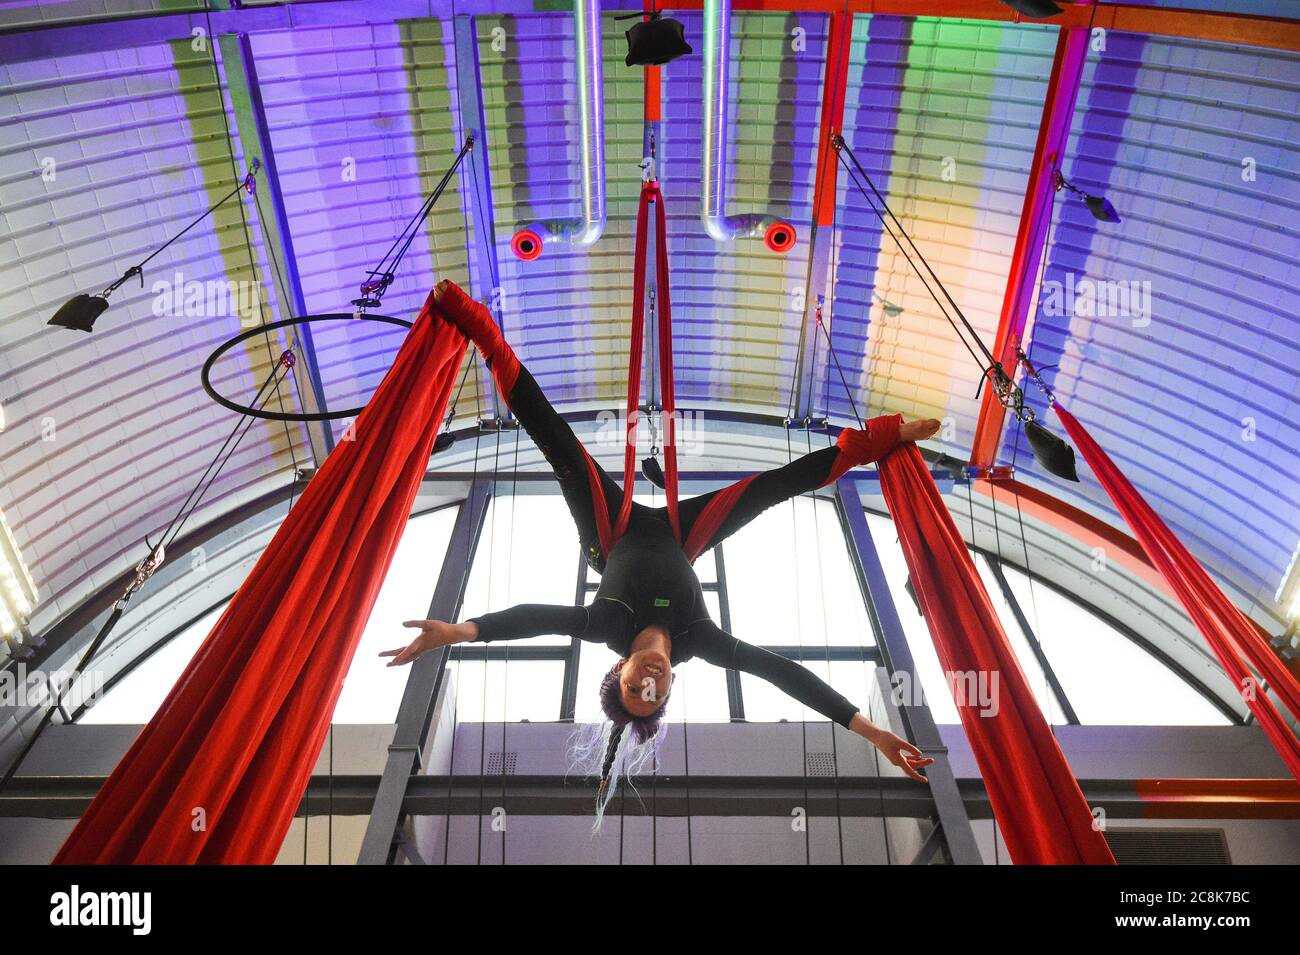 An aerialist practices her skills on ribbons at Flying Fantastic in Southwark, London, as indoor gyms, swimming pools and sports facilities can reopen as part of the latest easing of coronavirus lockdown measures in England. Stock Photo